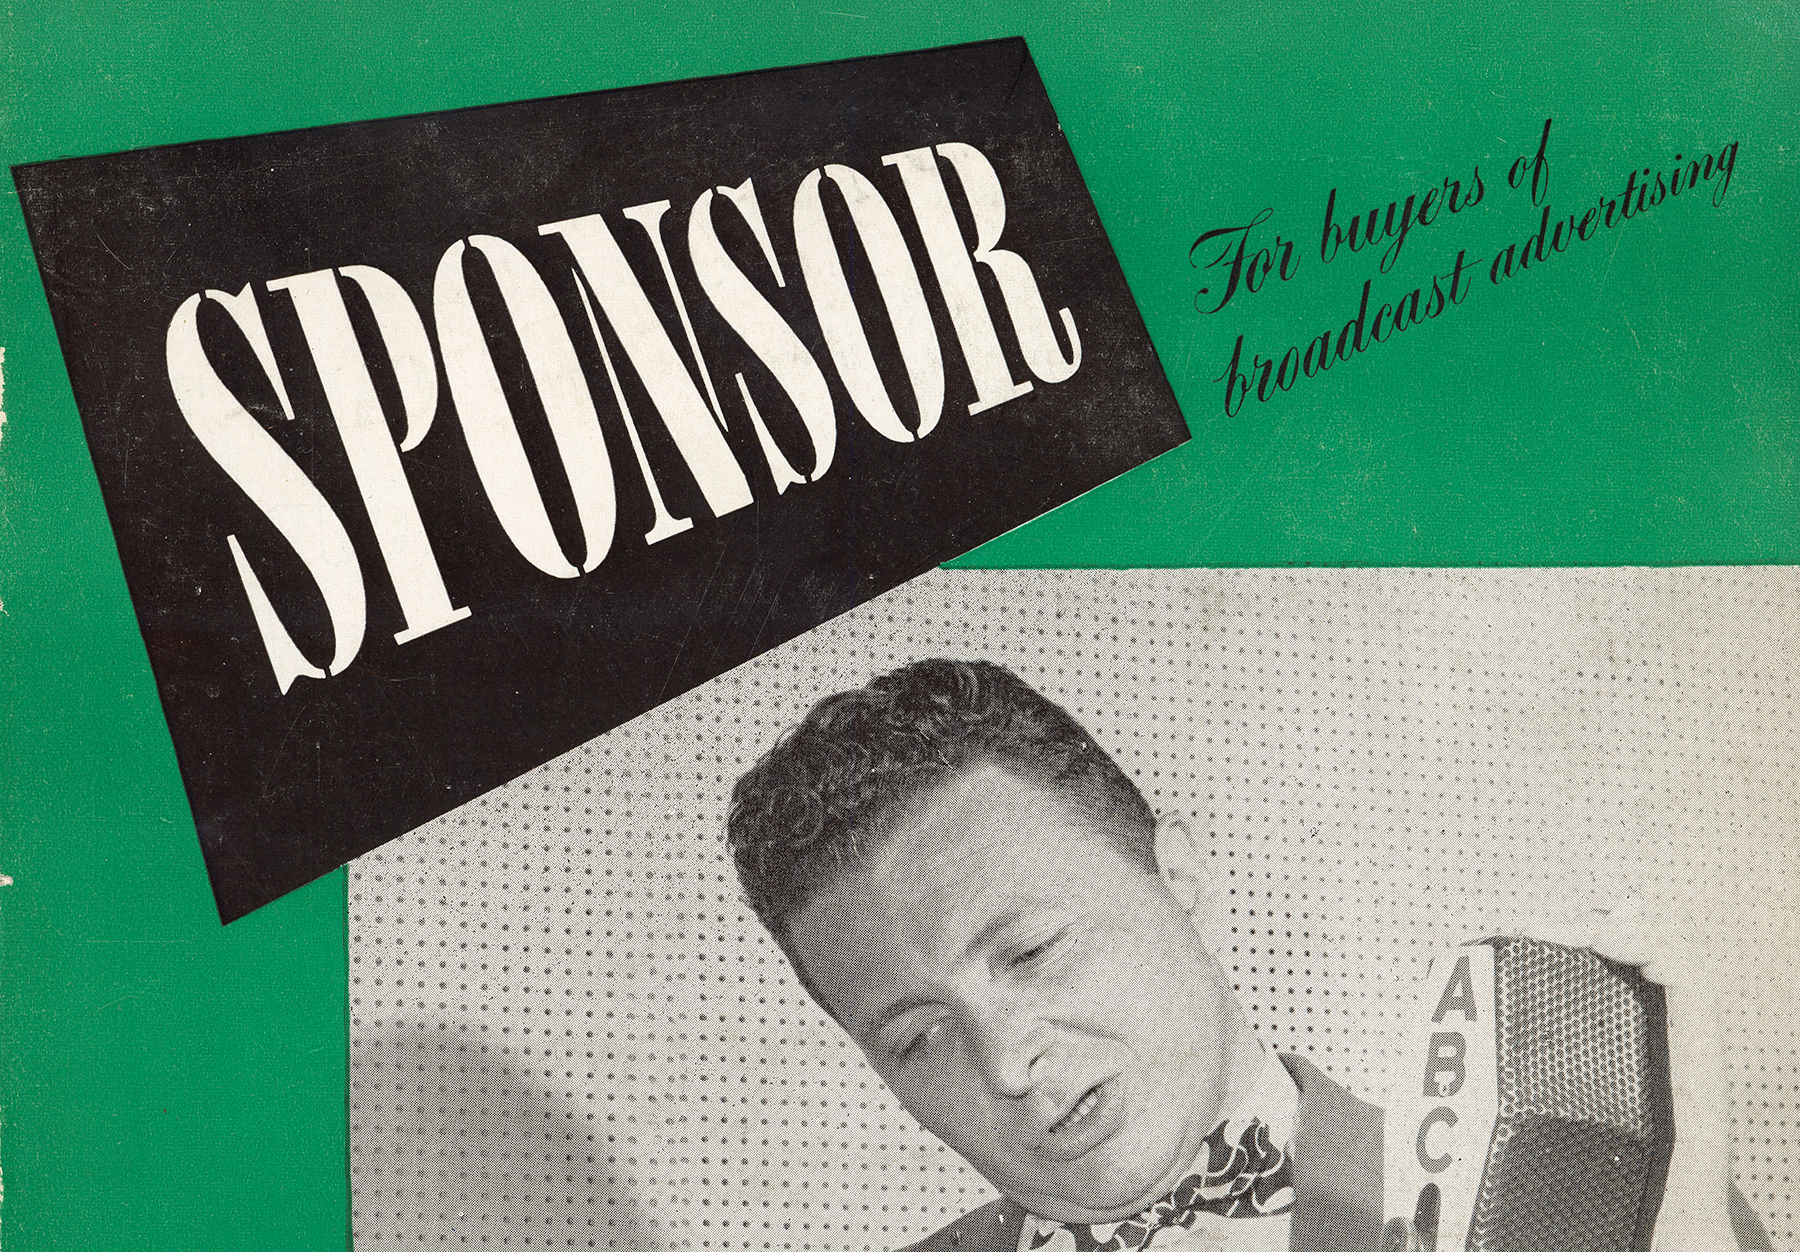 scan of a 1946 magazine called Sponsor with the tagline “for buyers of broadcast advertising”. The image shows a man standing behind an ABC microphone.